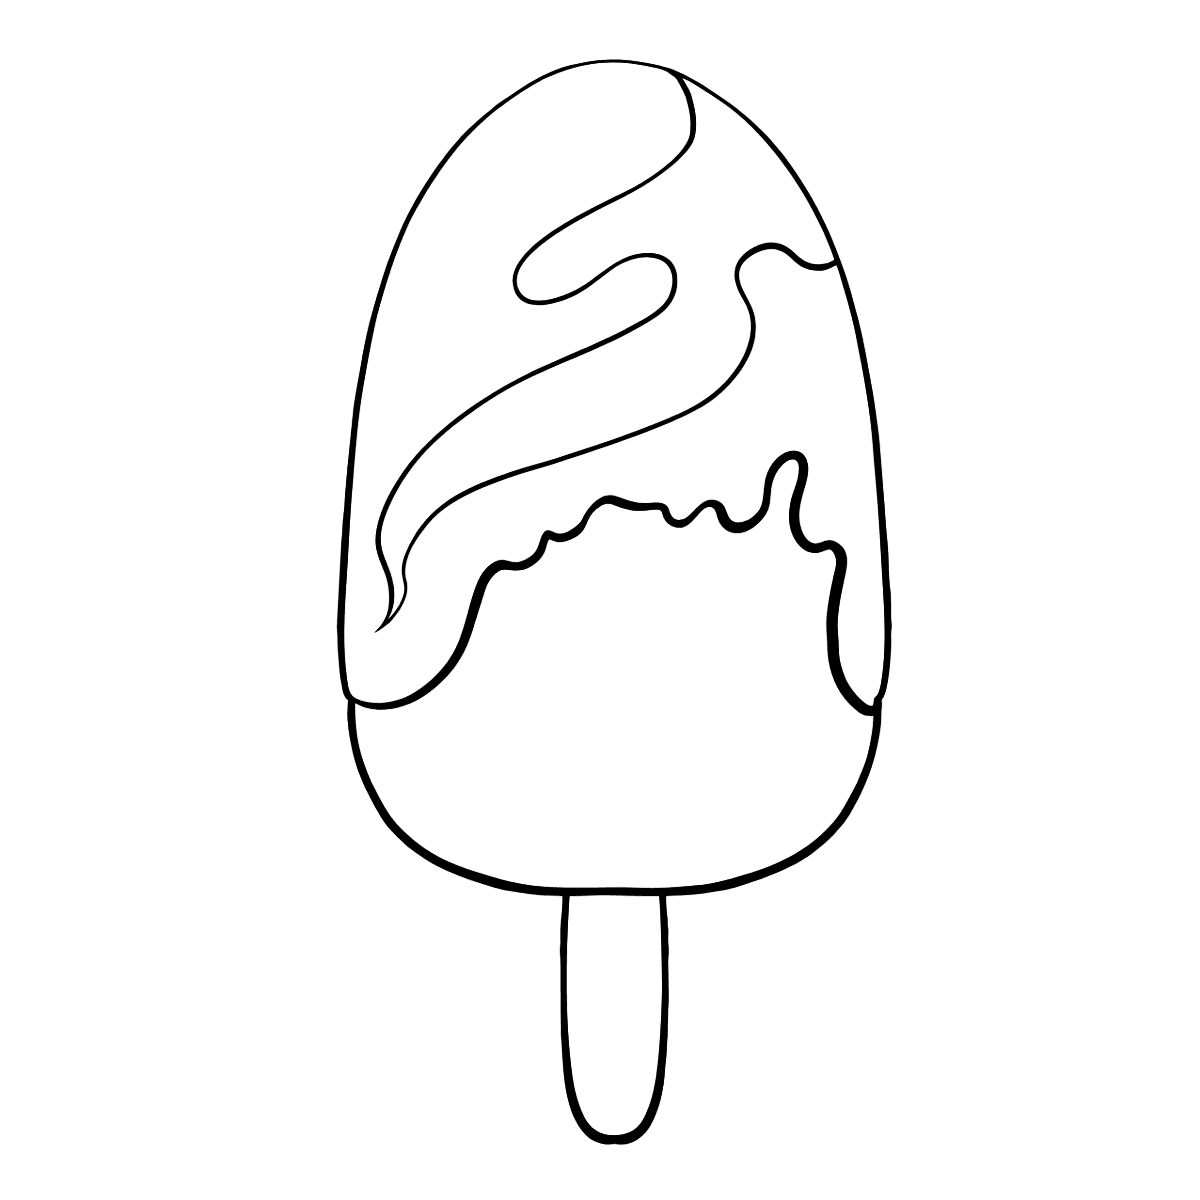 Popsicle with Chocolate and Syrup coloring page Online Free!